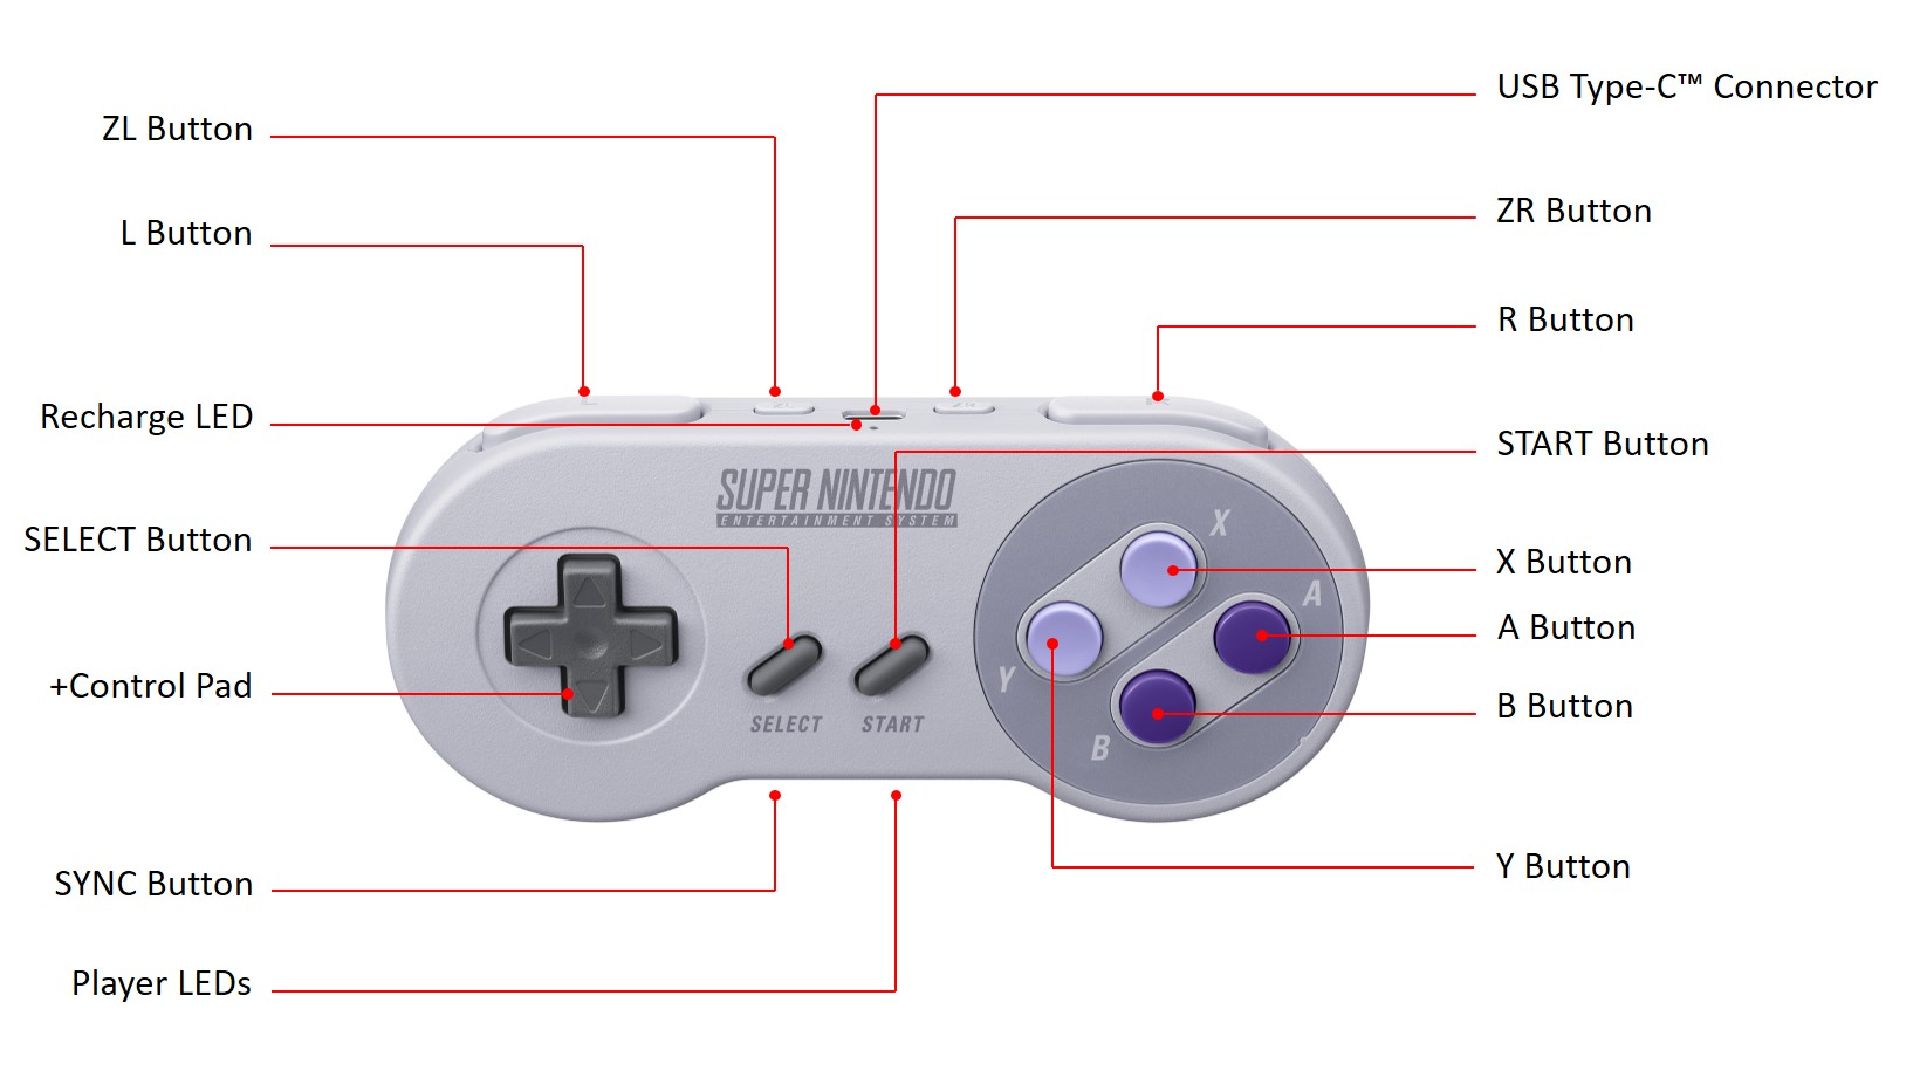 The Nintendo Classic Controllers